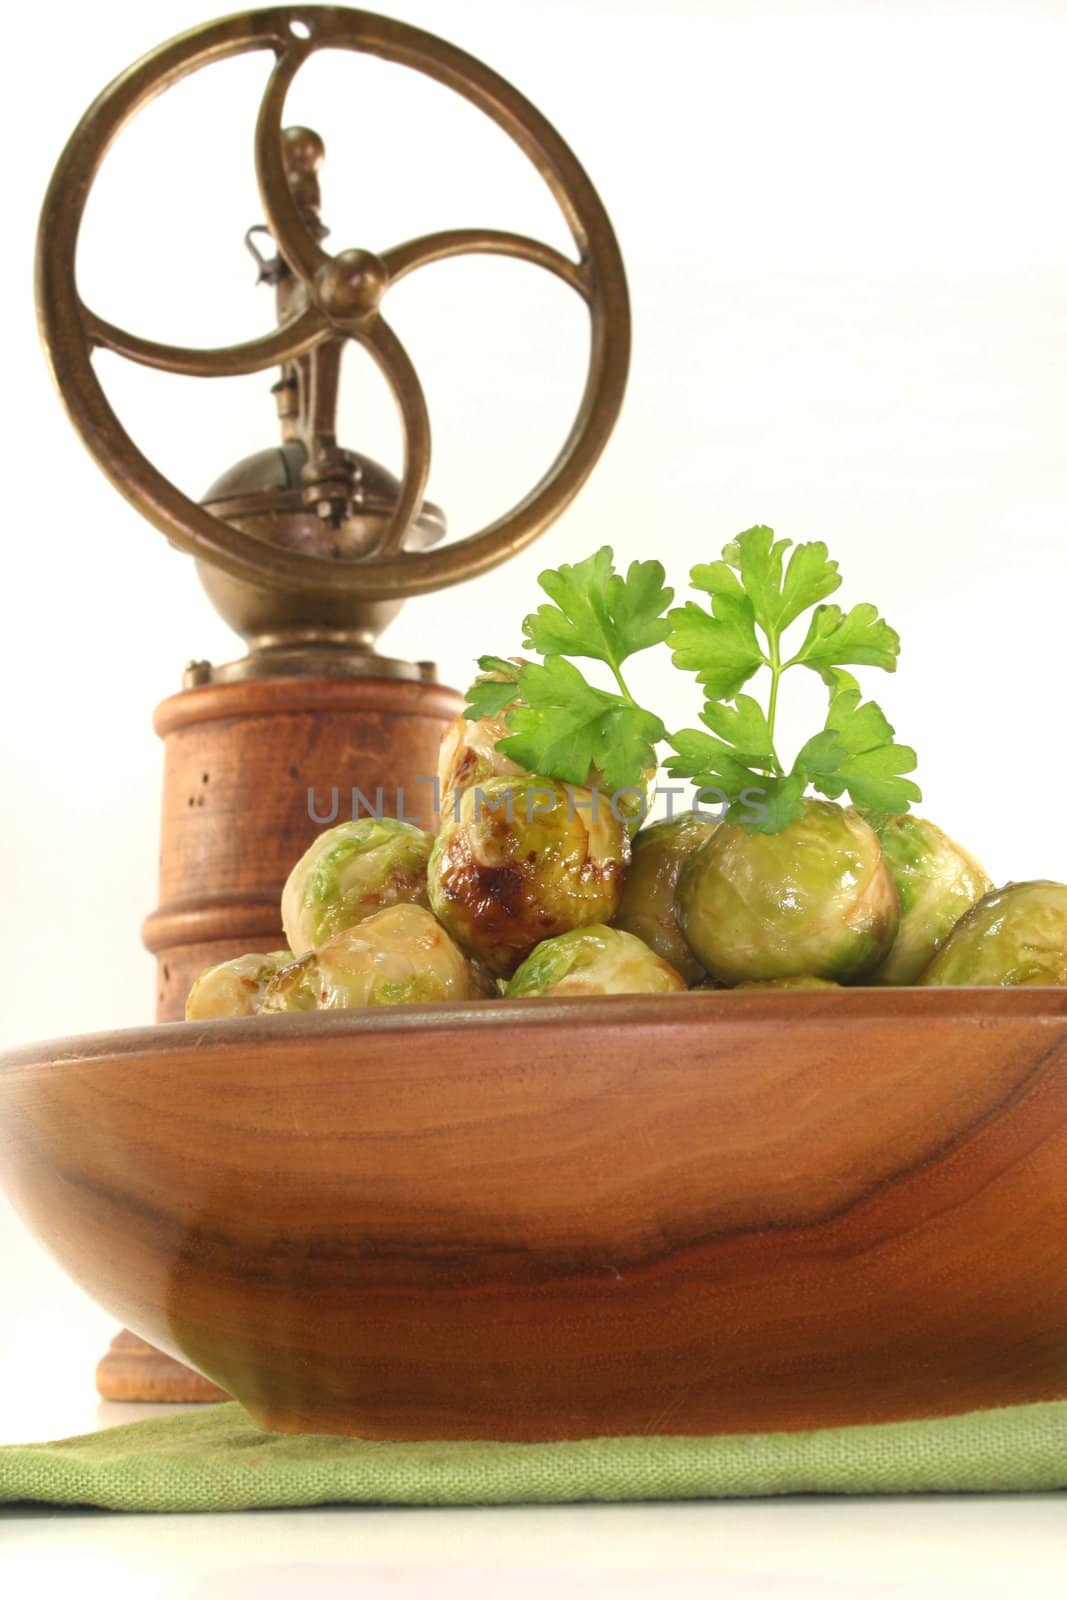 roasted brussels sprouts in a wooden bowl on a green napkin